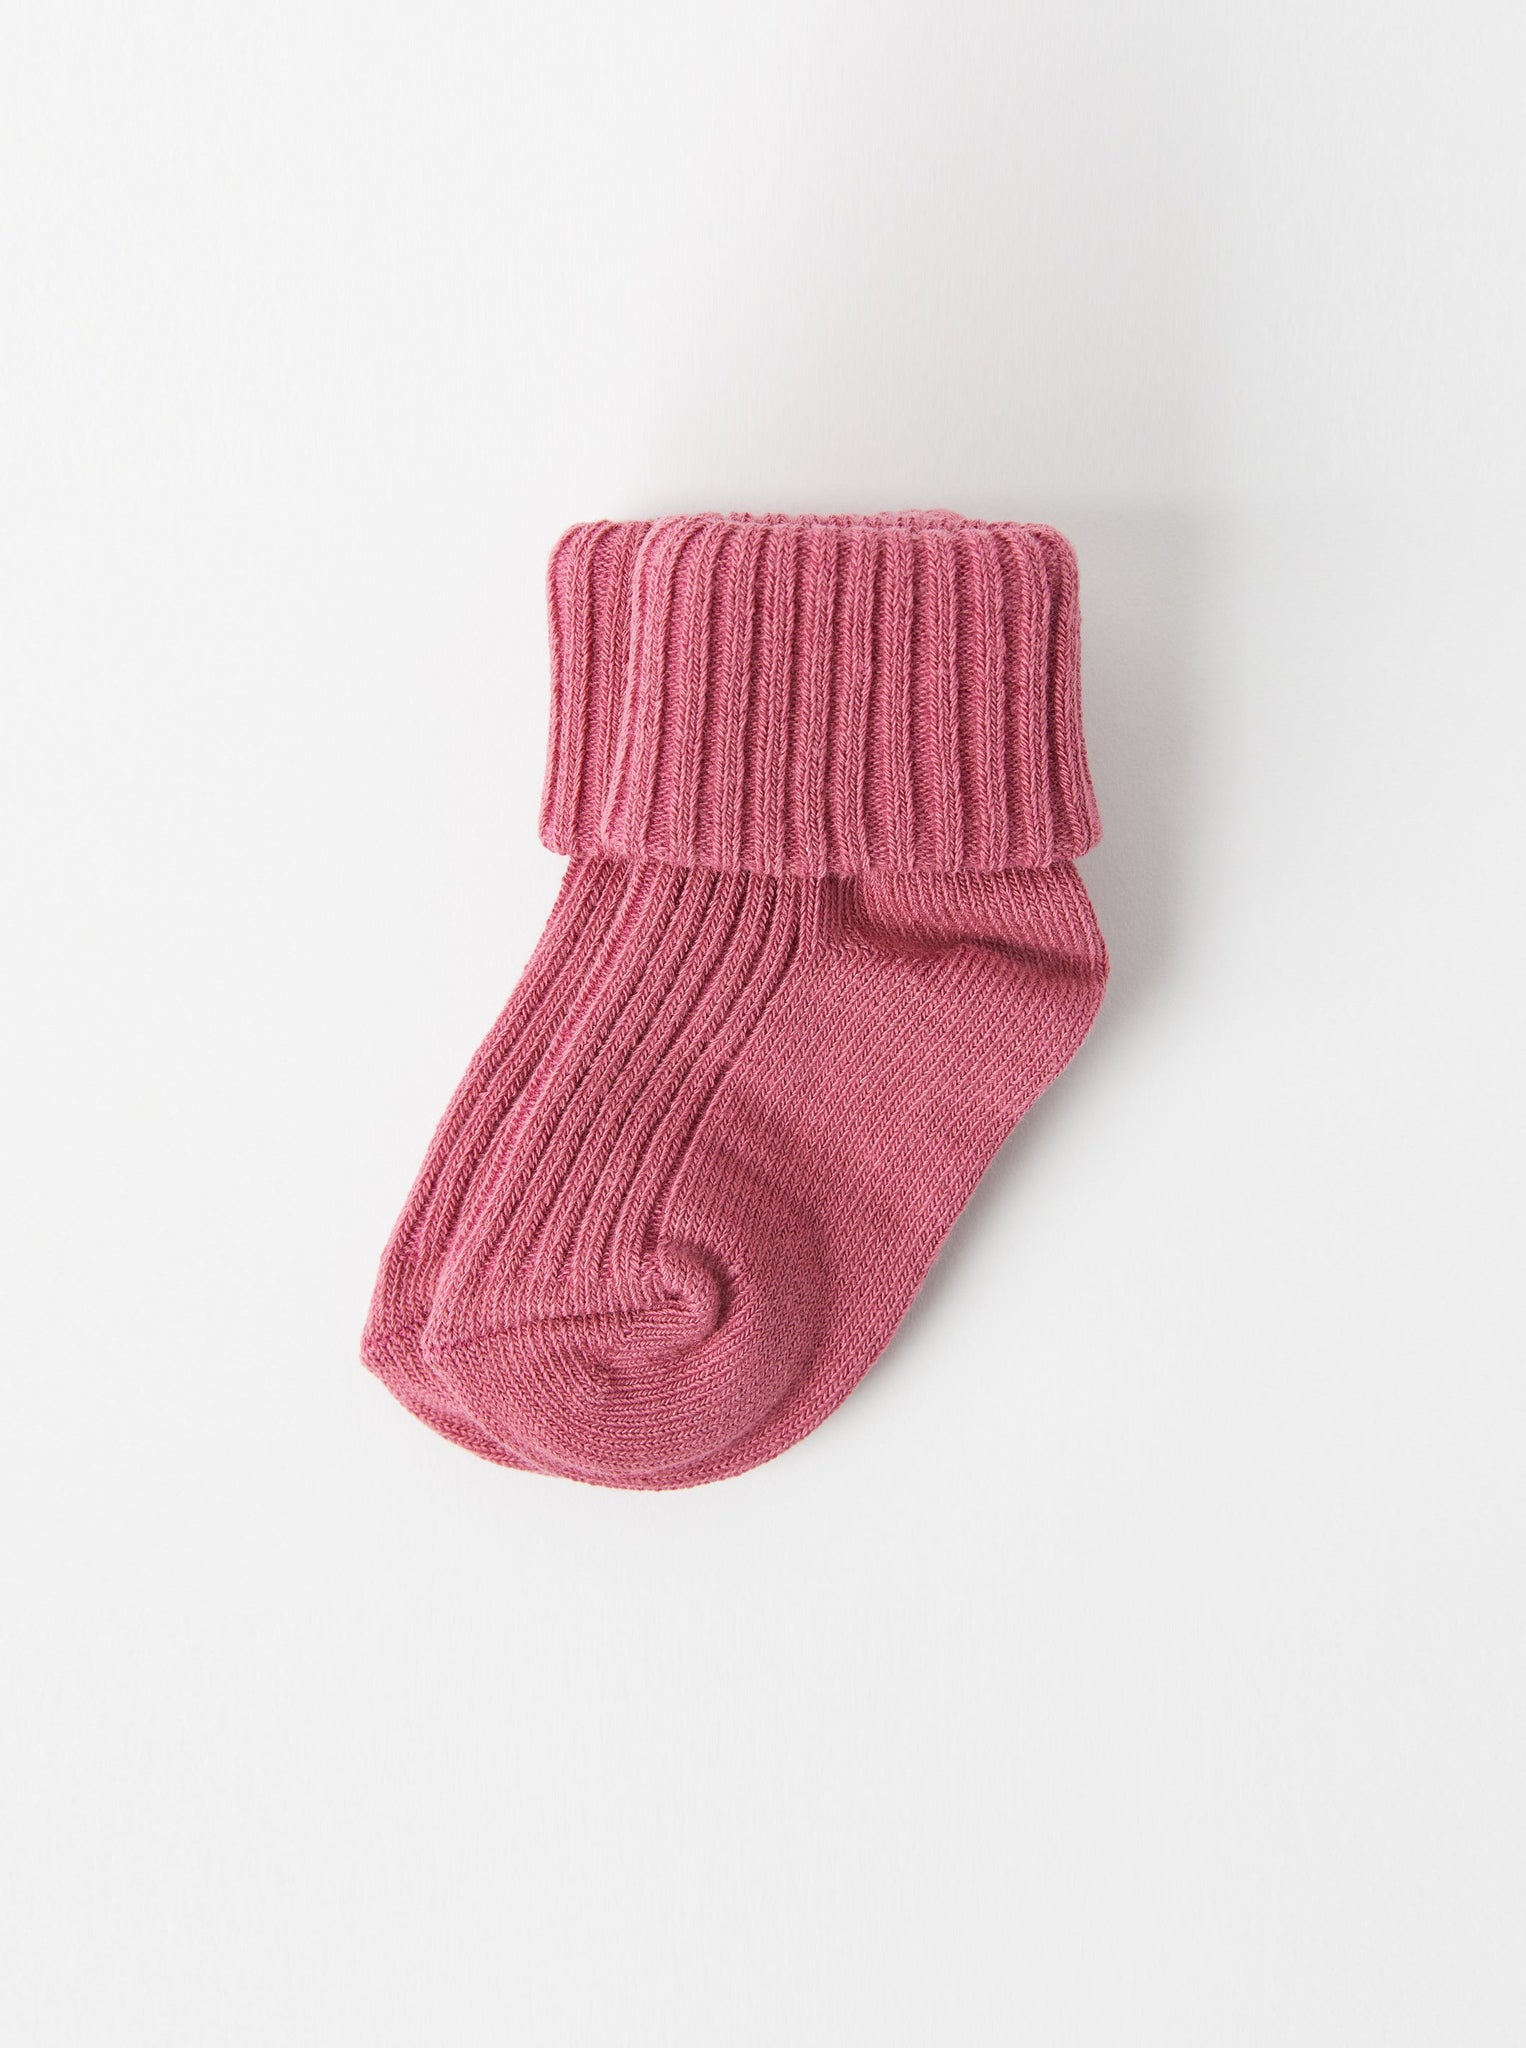 Organic Cotton Pink Baby Socks from the Polarn O. Pyret Kidswear collection. Ethically produced kids clothing.